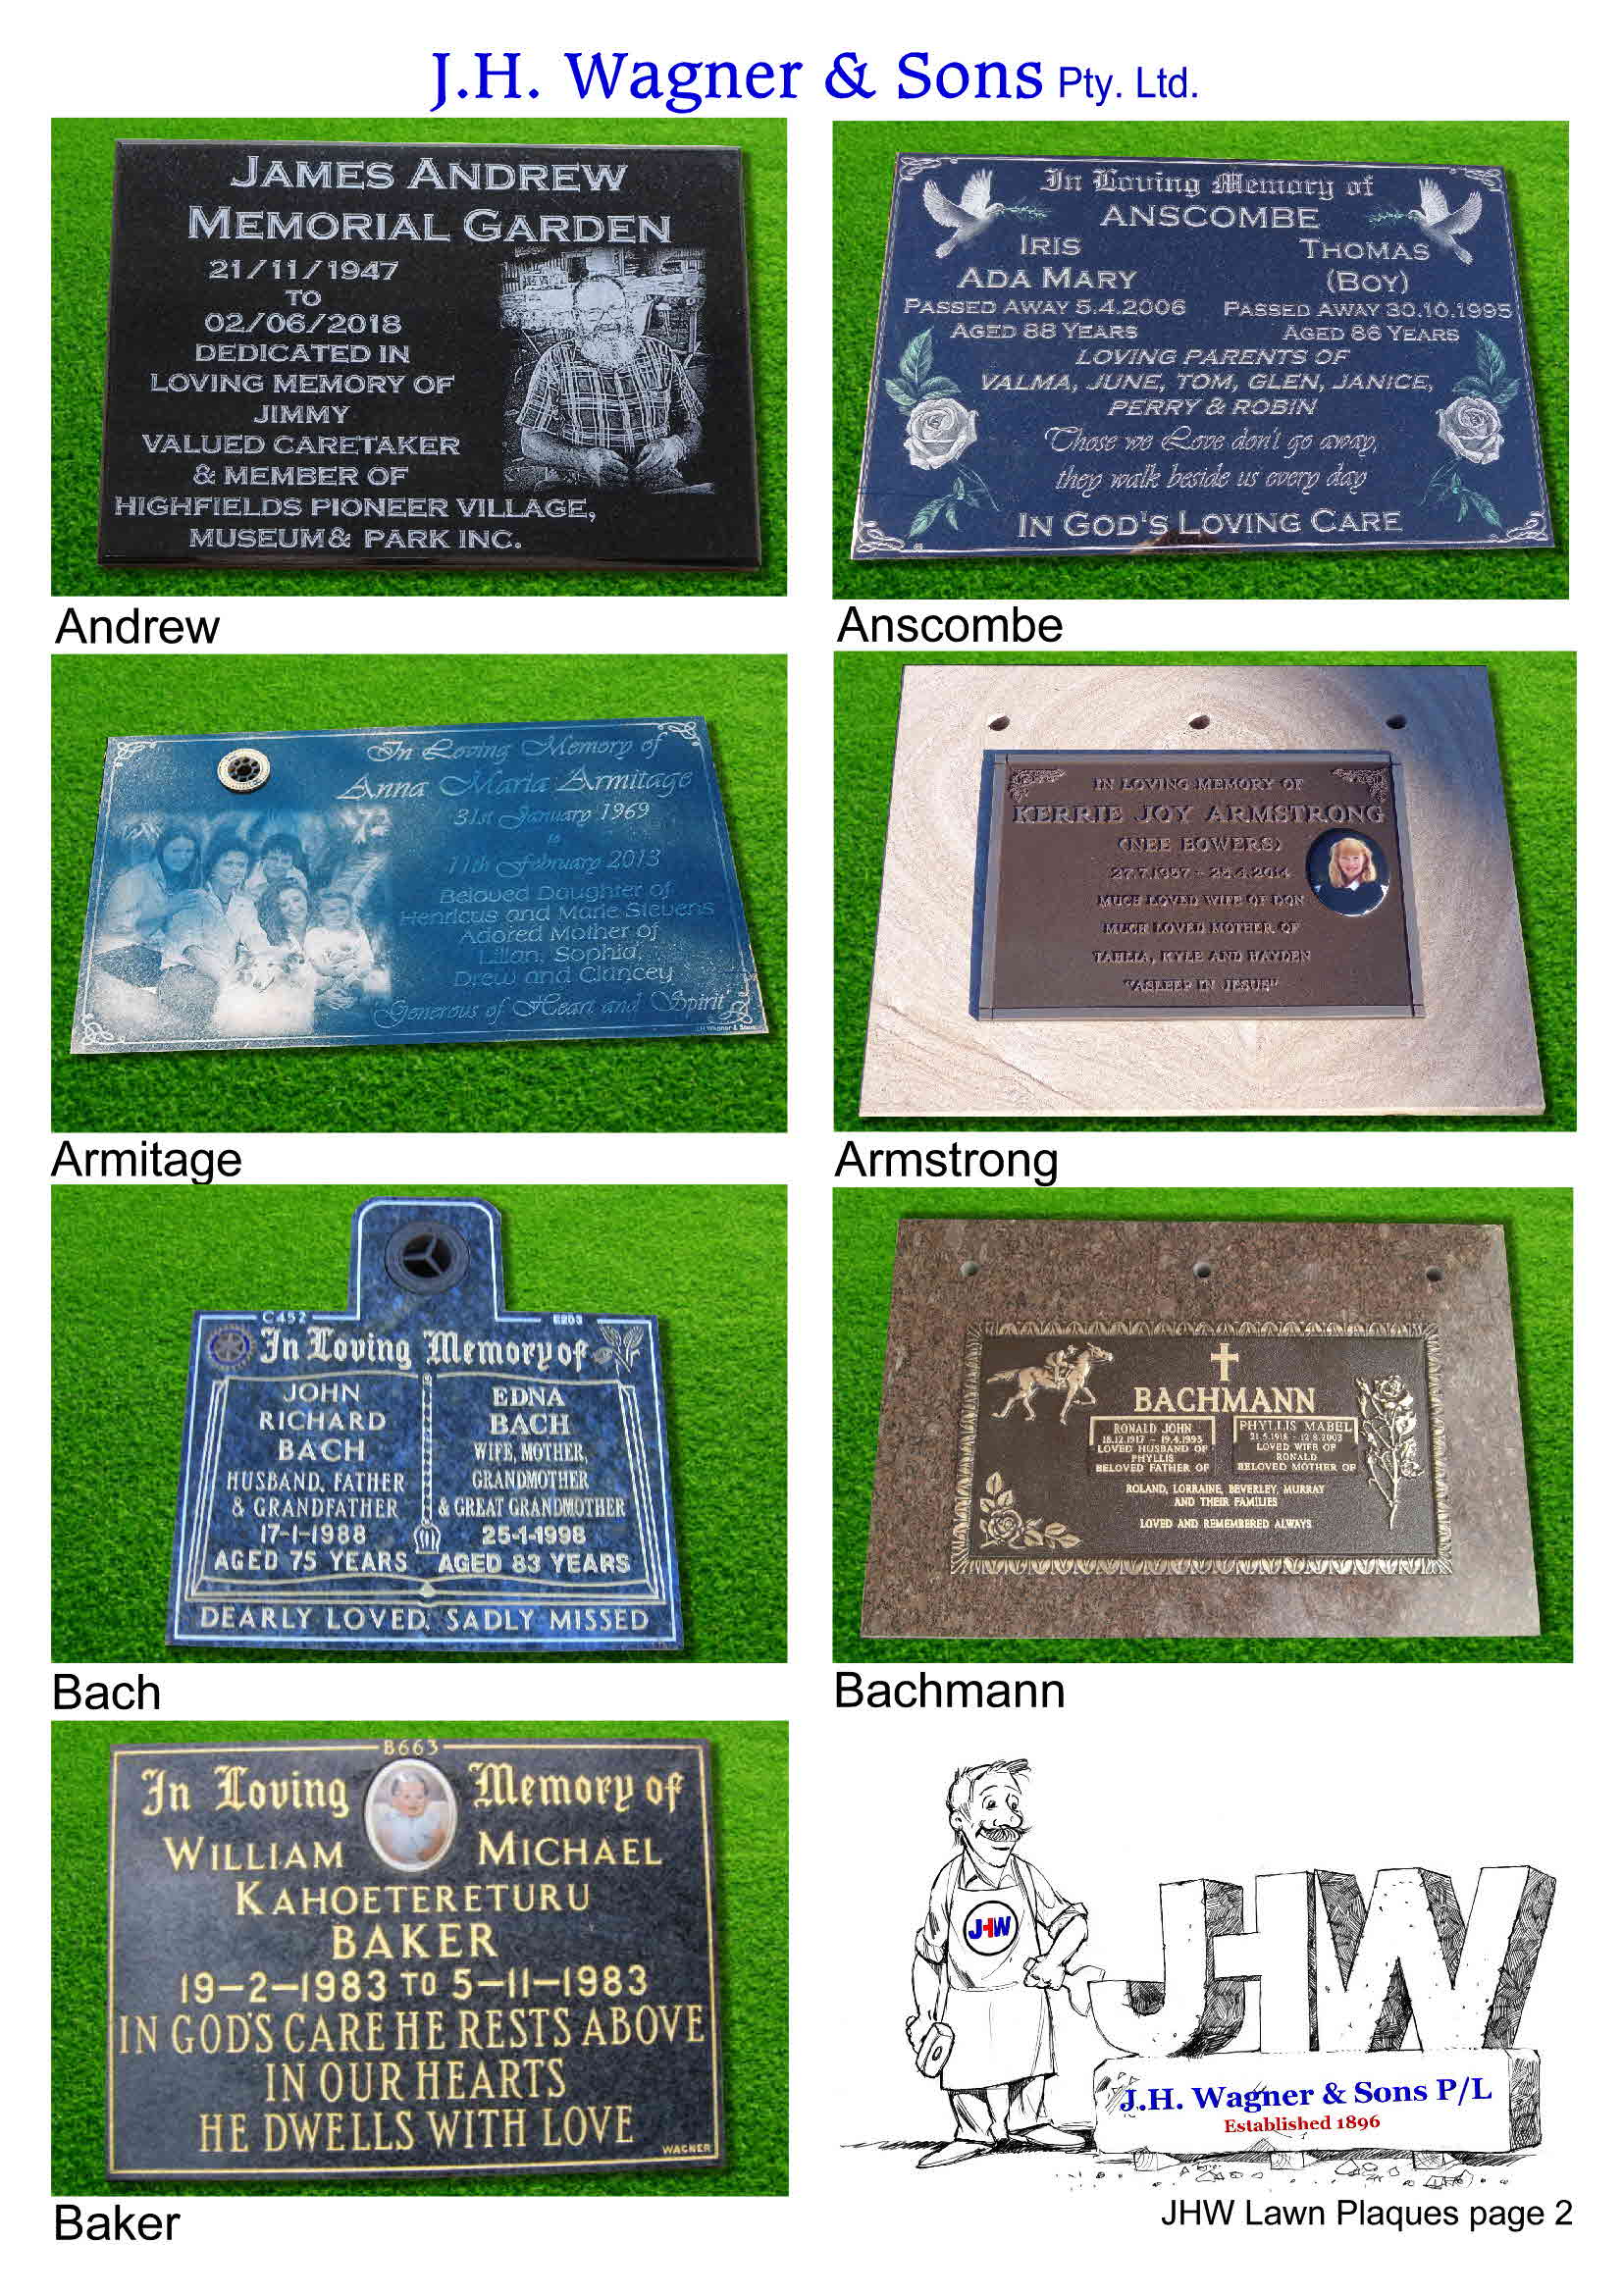 Cemetery lawn plaques by J.H. Wagner